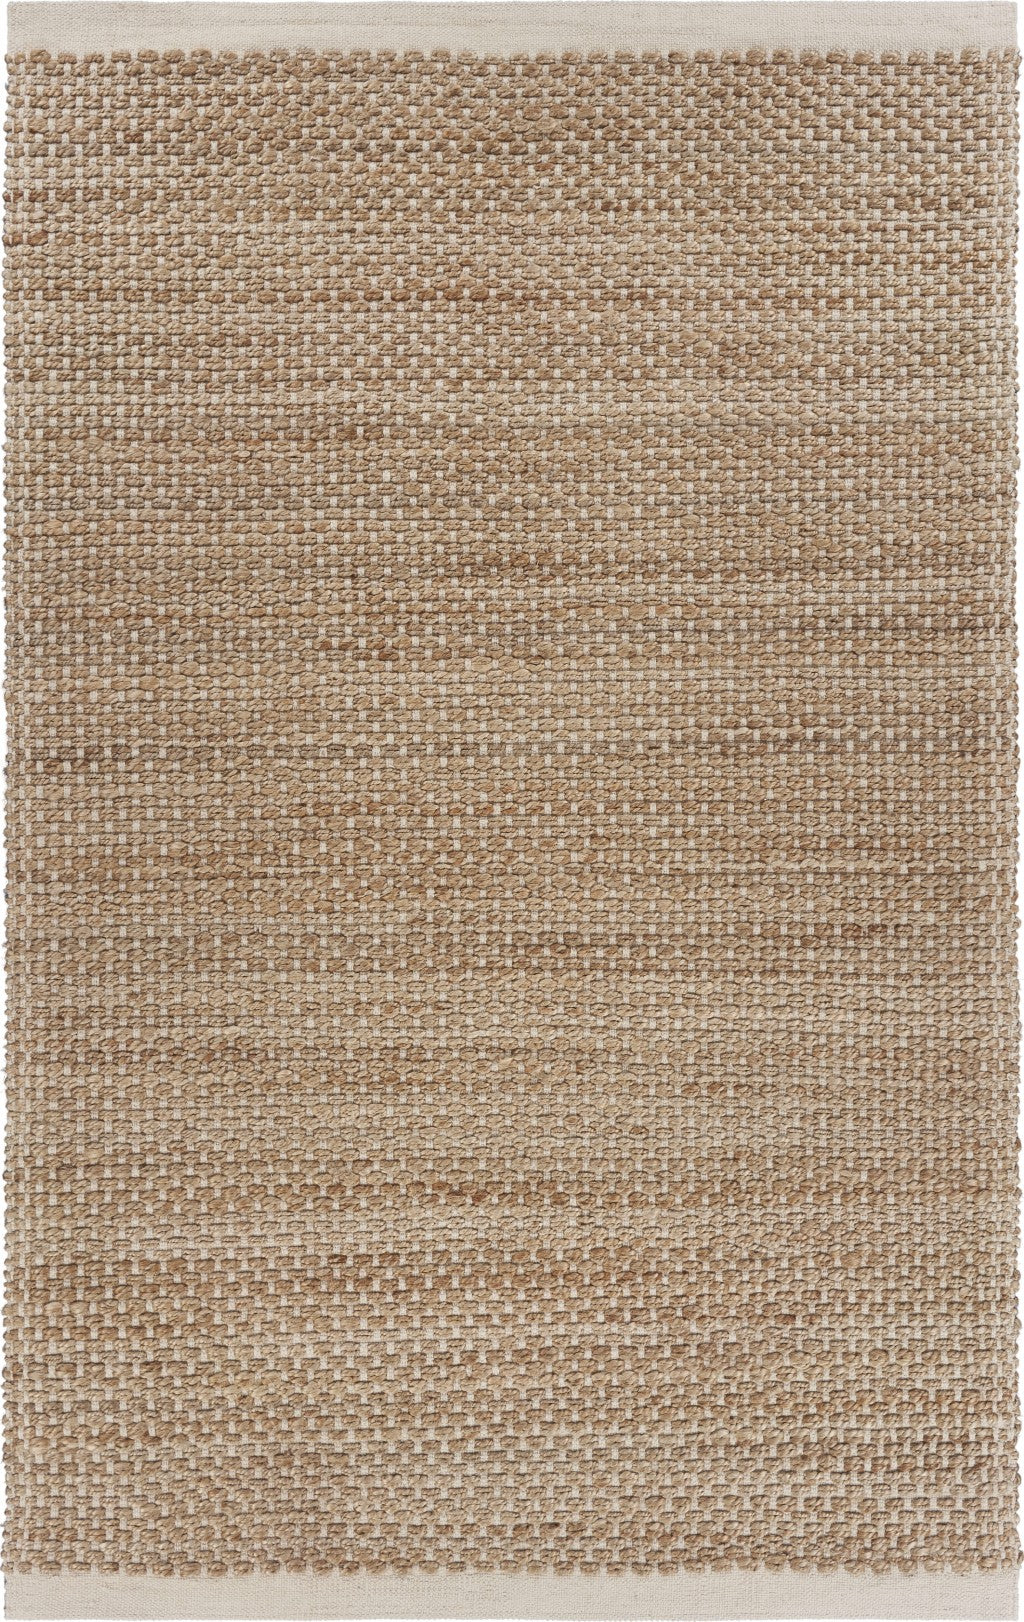 5’ x 8’ Tan and White Detailed Woven Area Rug